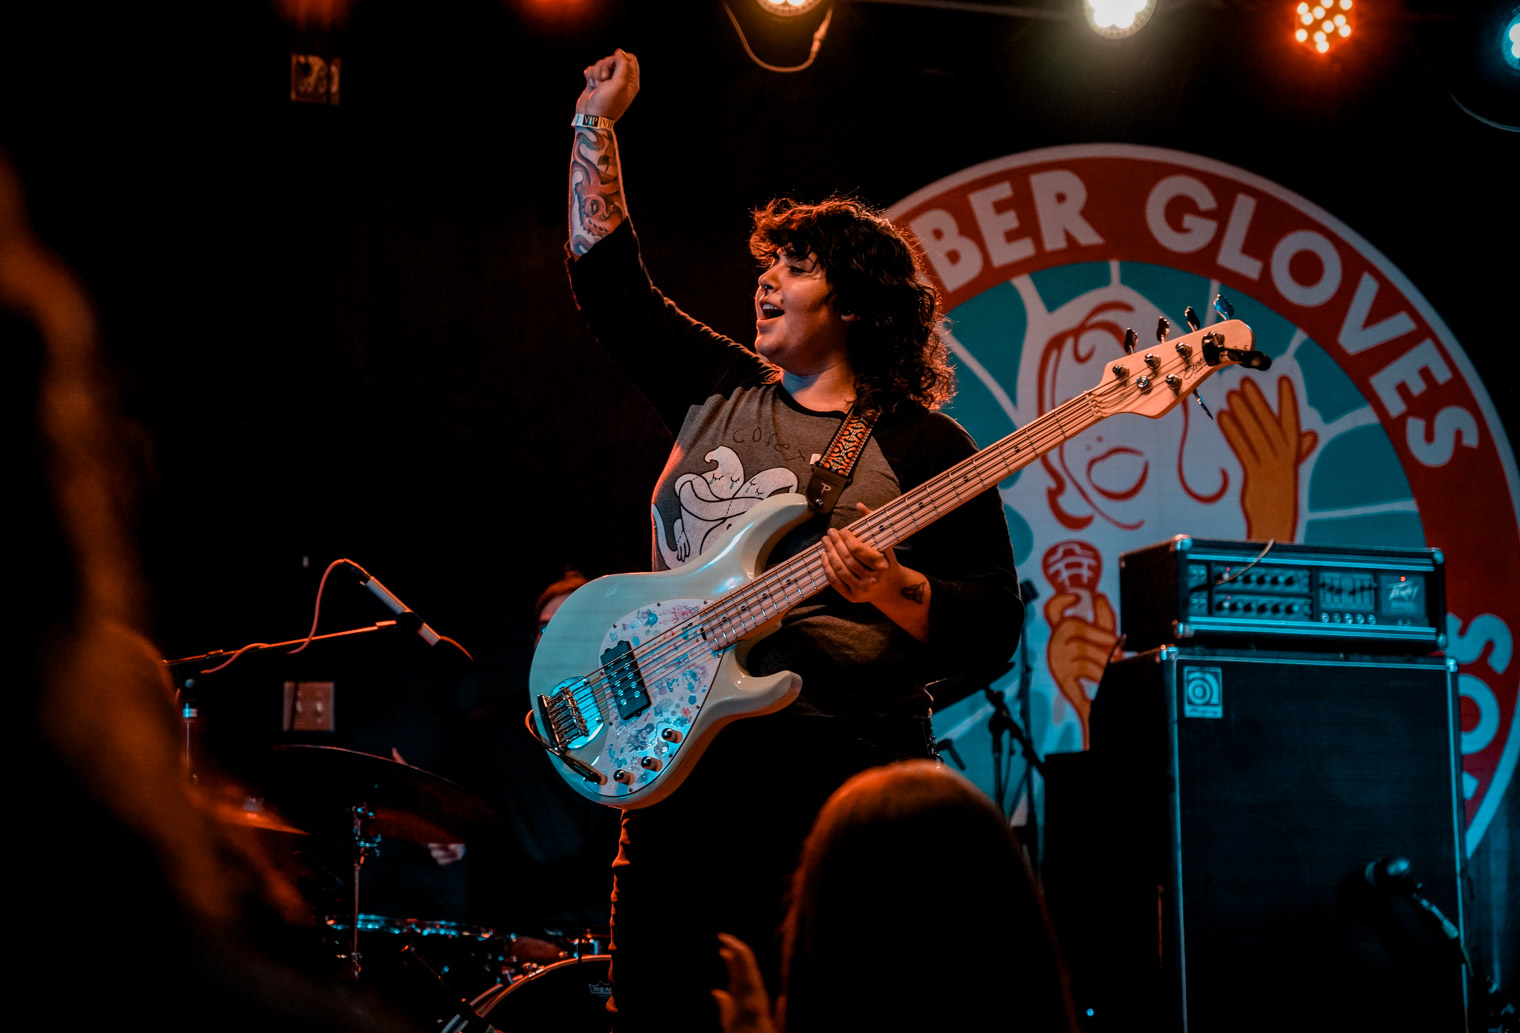 A musician on stage with a bass guitar, and her hand in the air